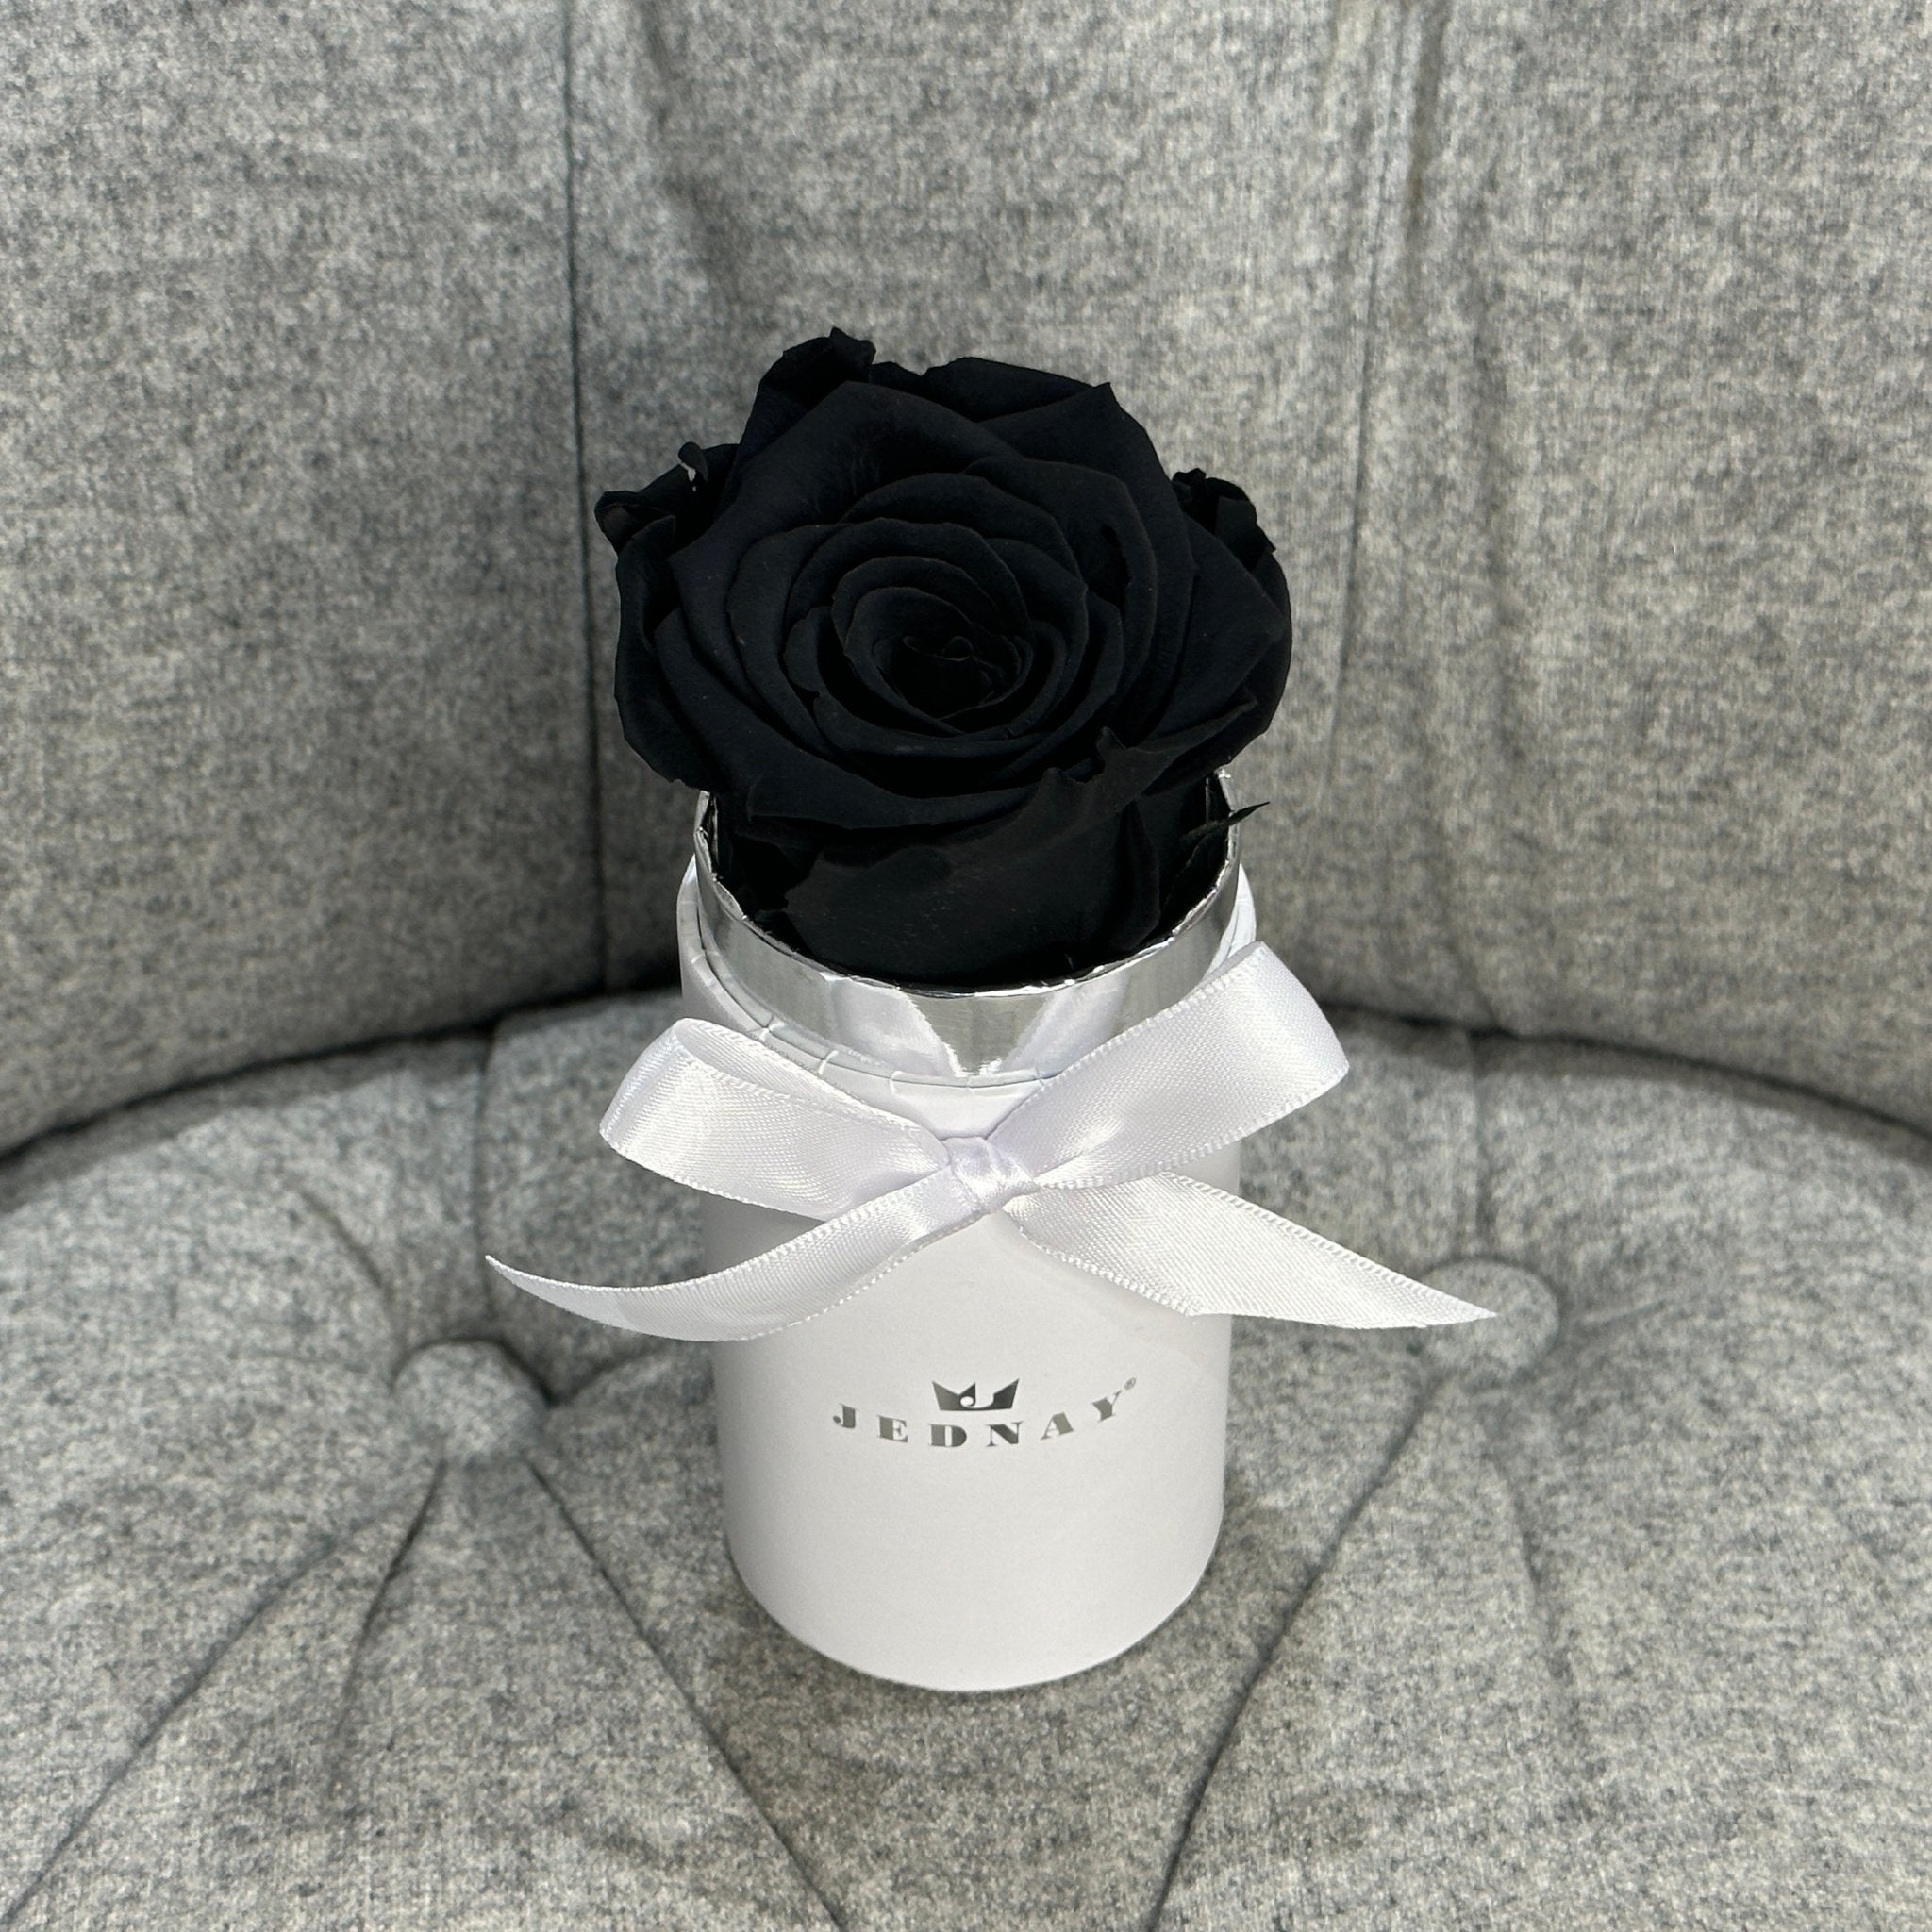 The Uno - Midnight Black Eternal Rose - Classic White Box - Jednay Roses